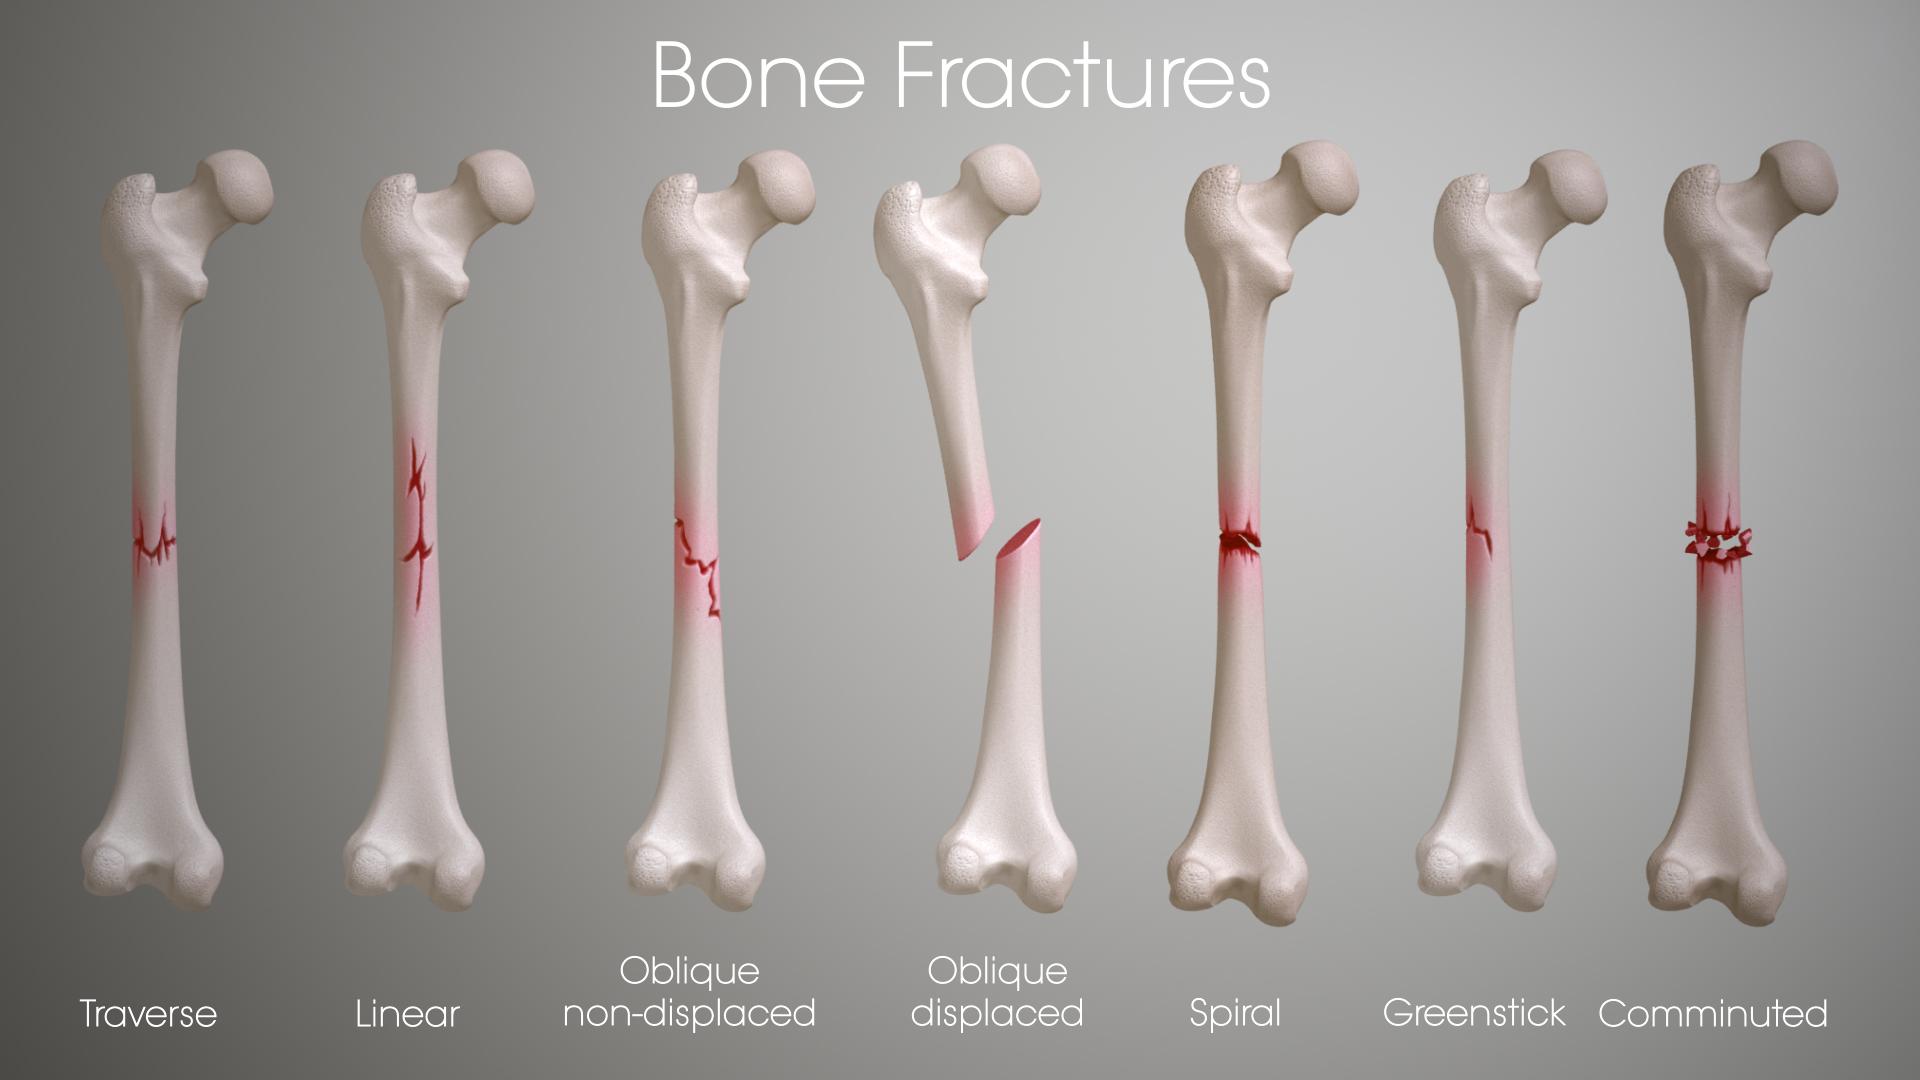 also called a closed fracture